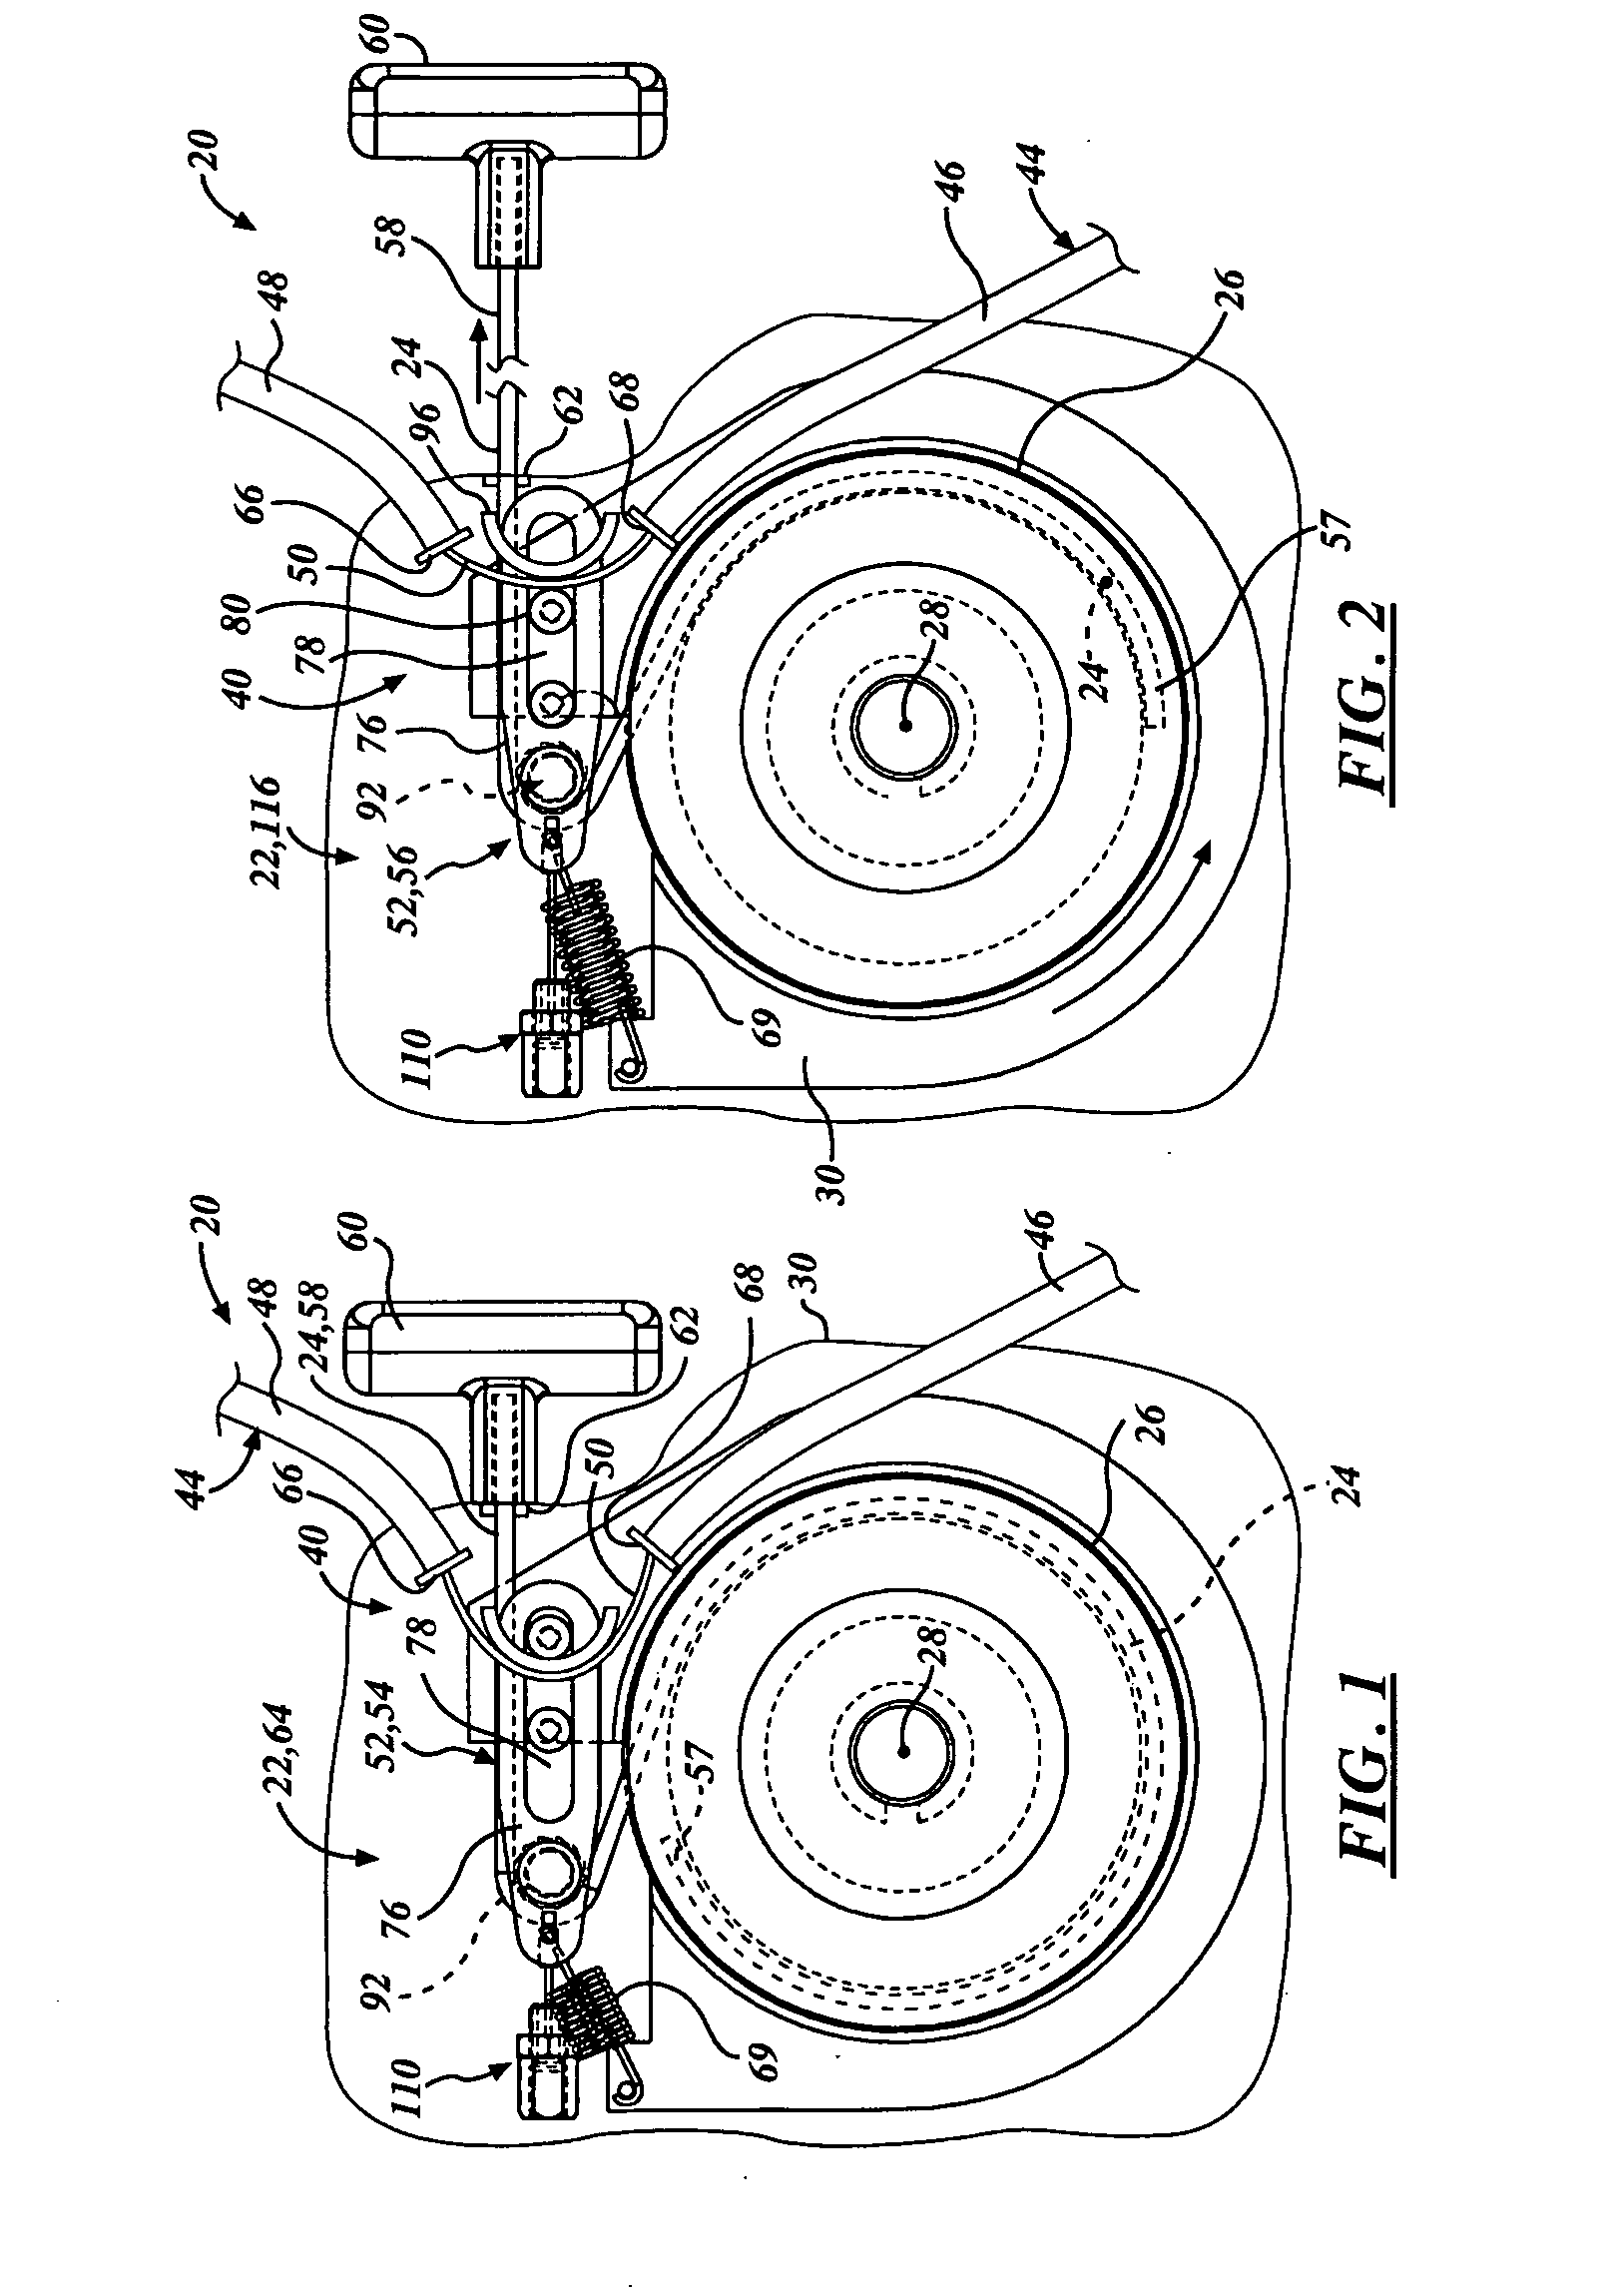 Combustion engine pull-cord start system